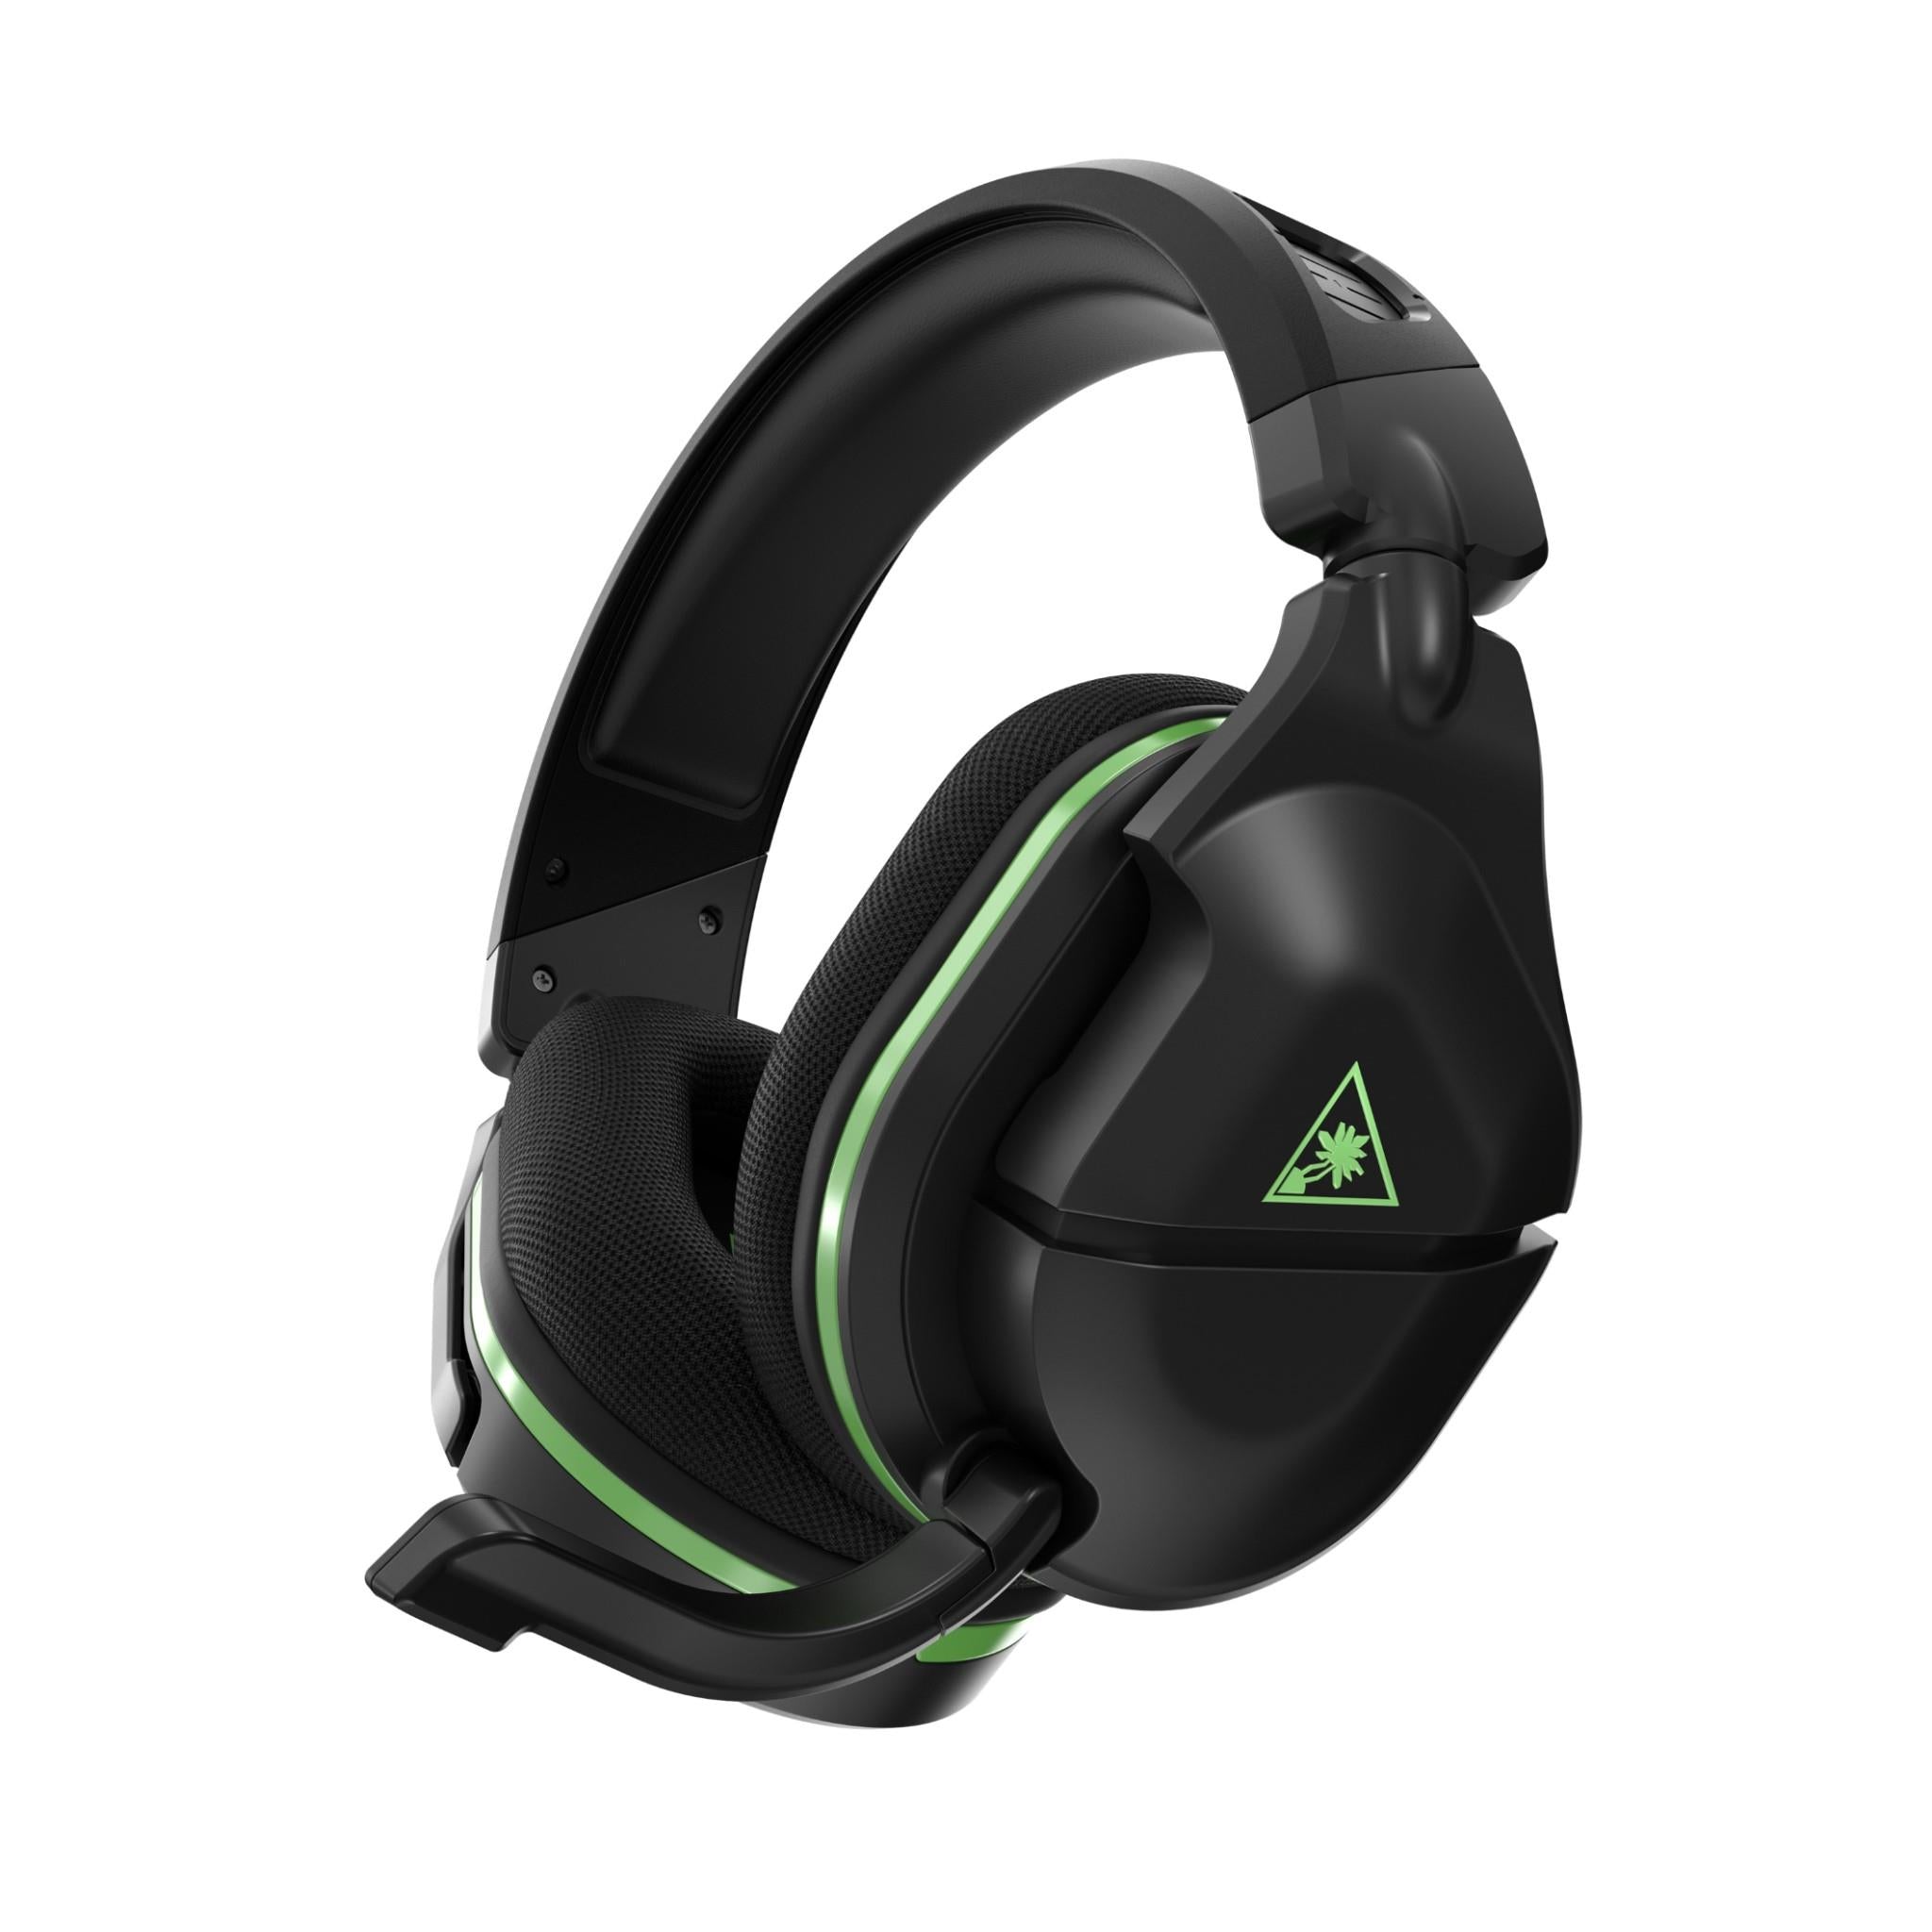 turtle beach stealth 600 usb wireless surround sound gaming headset for xbox series x/s (black)